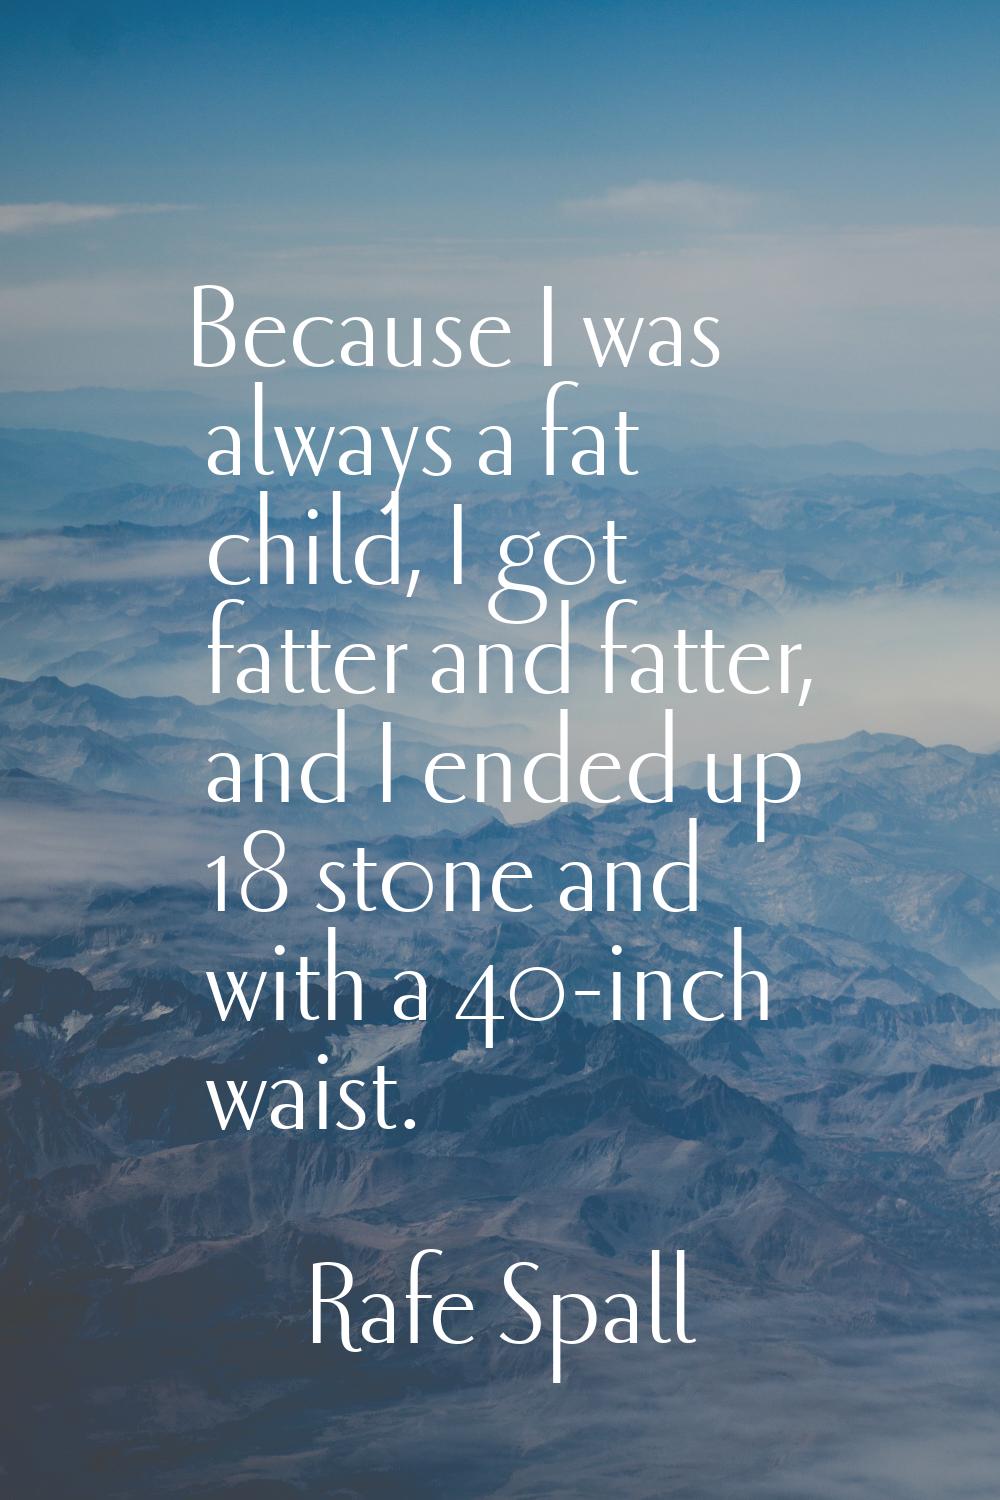 Because I was always a fat child, I got fatter and fatter, and I ended up 18 stone and with a 40-in